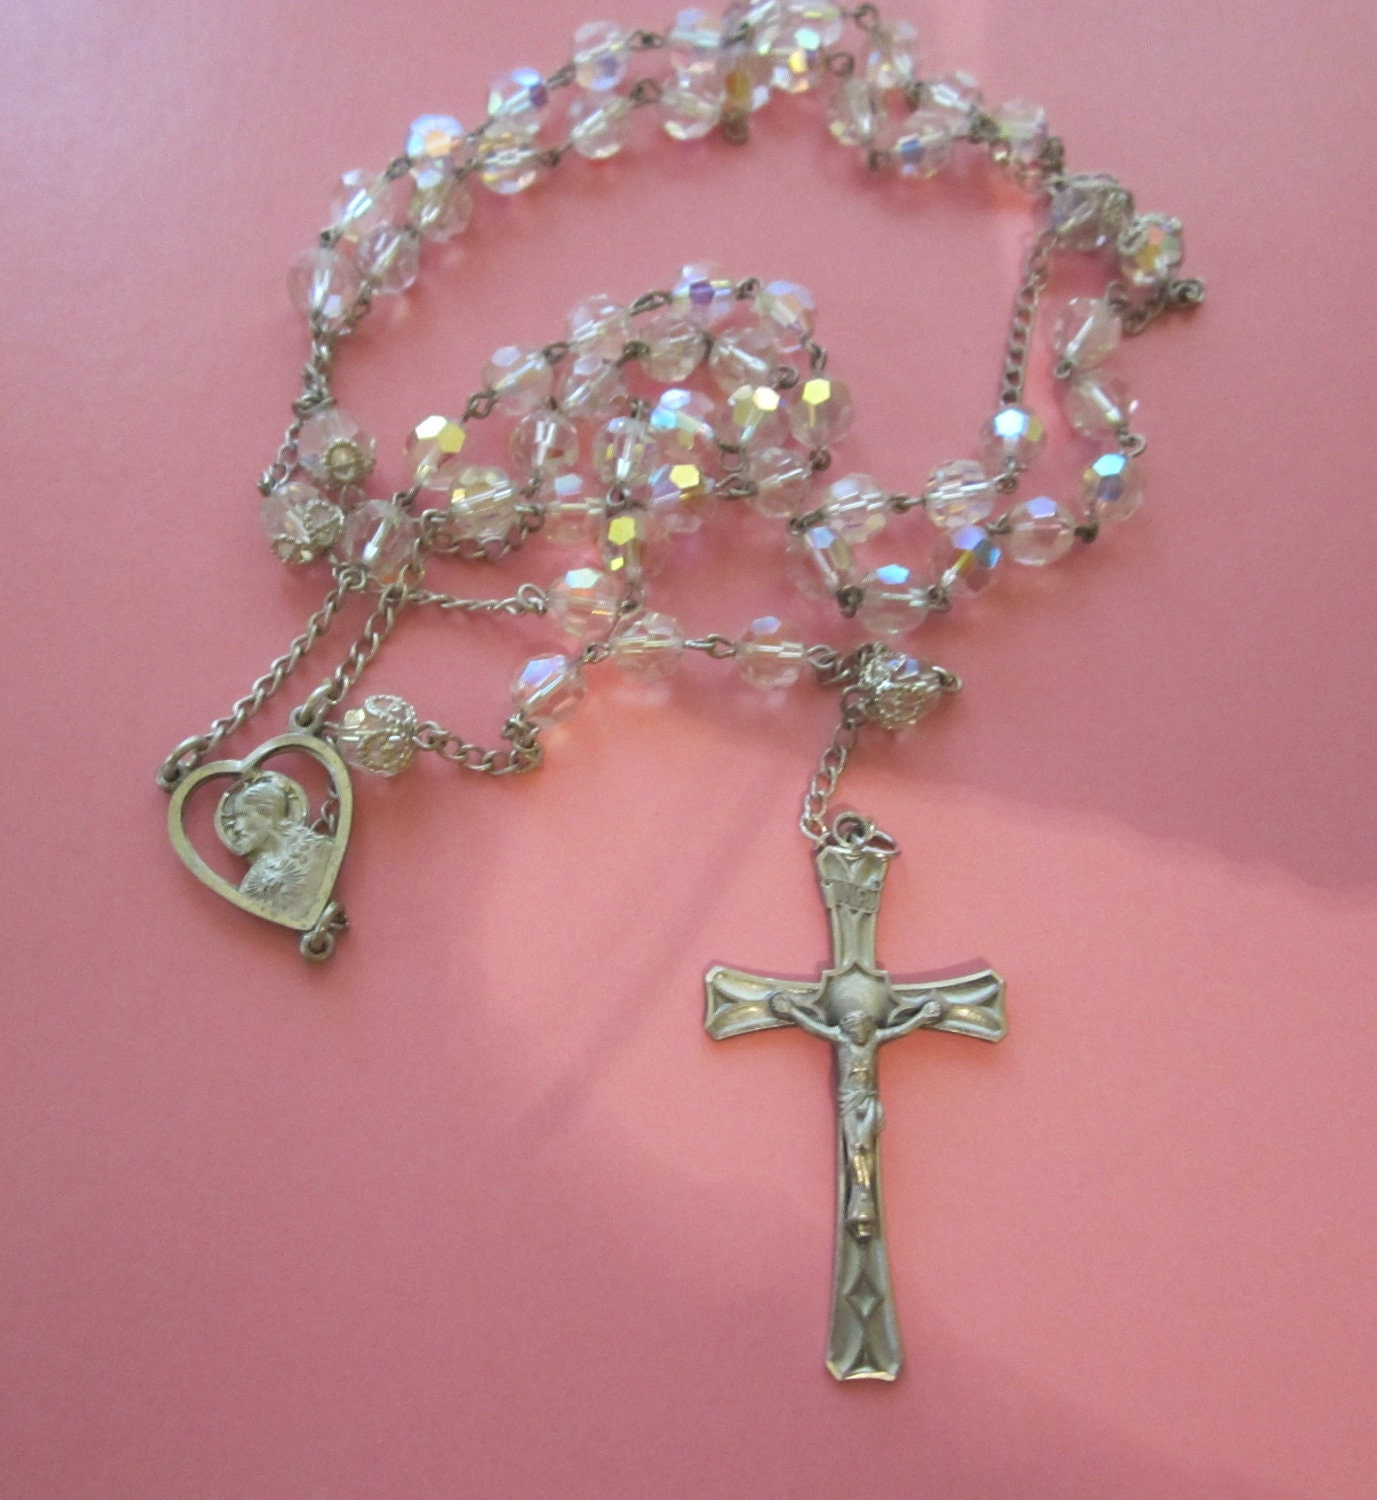 Catholic Rosary Beads Blessed by the Pope by cantfollowdirections